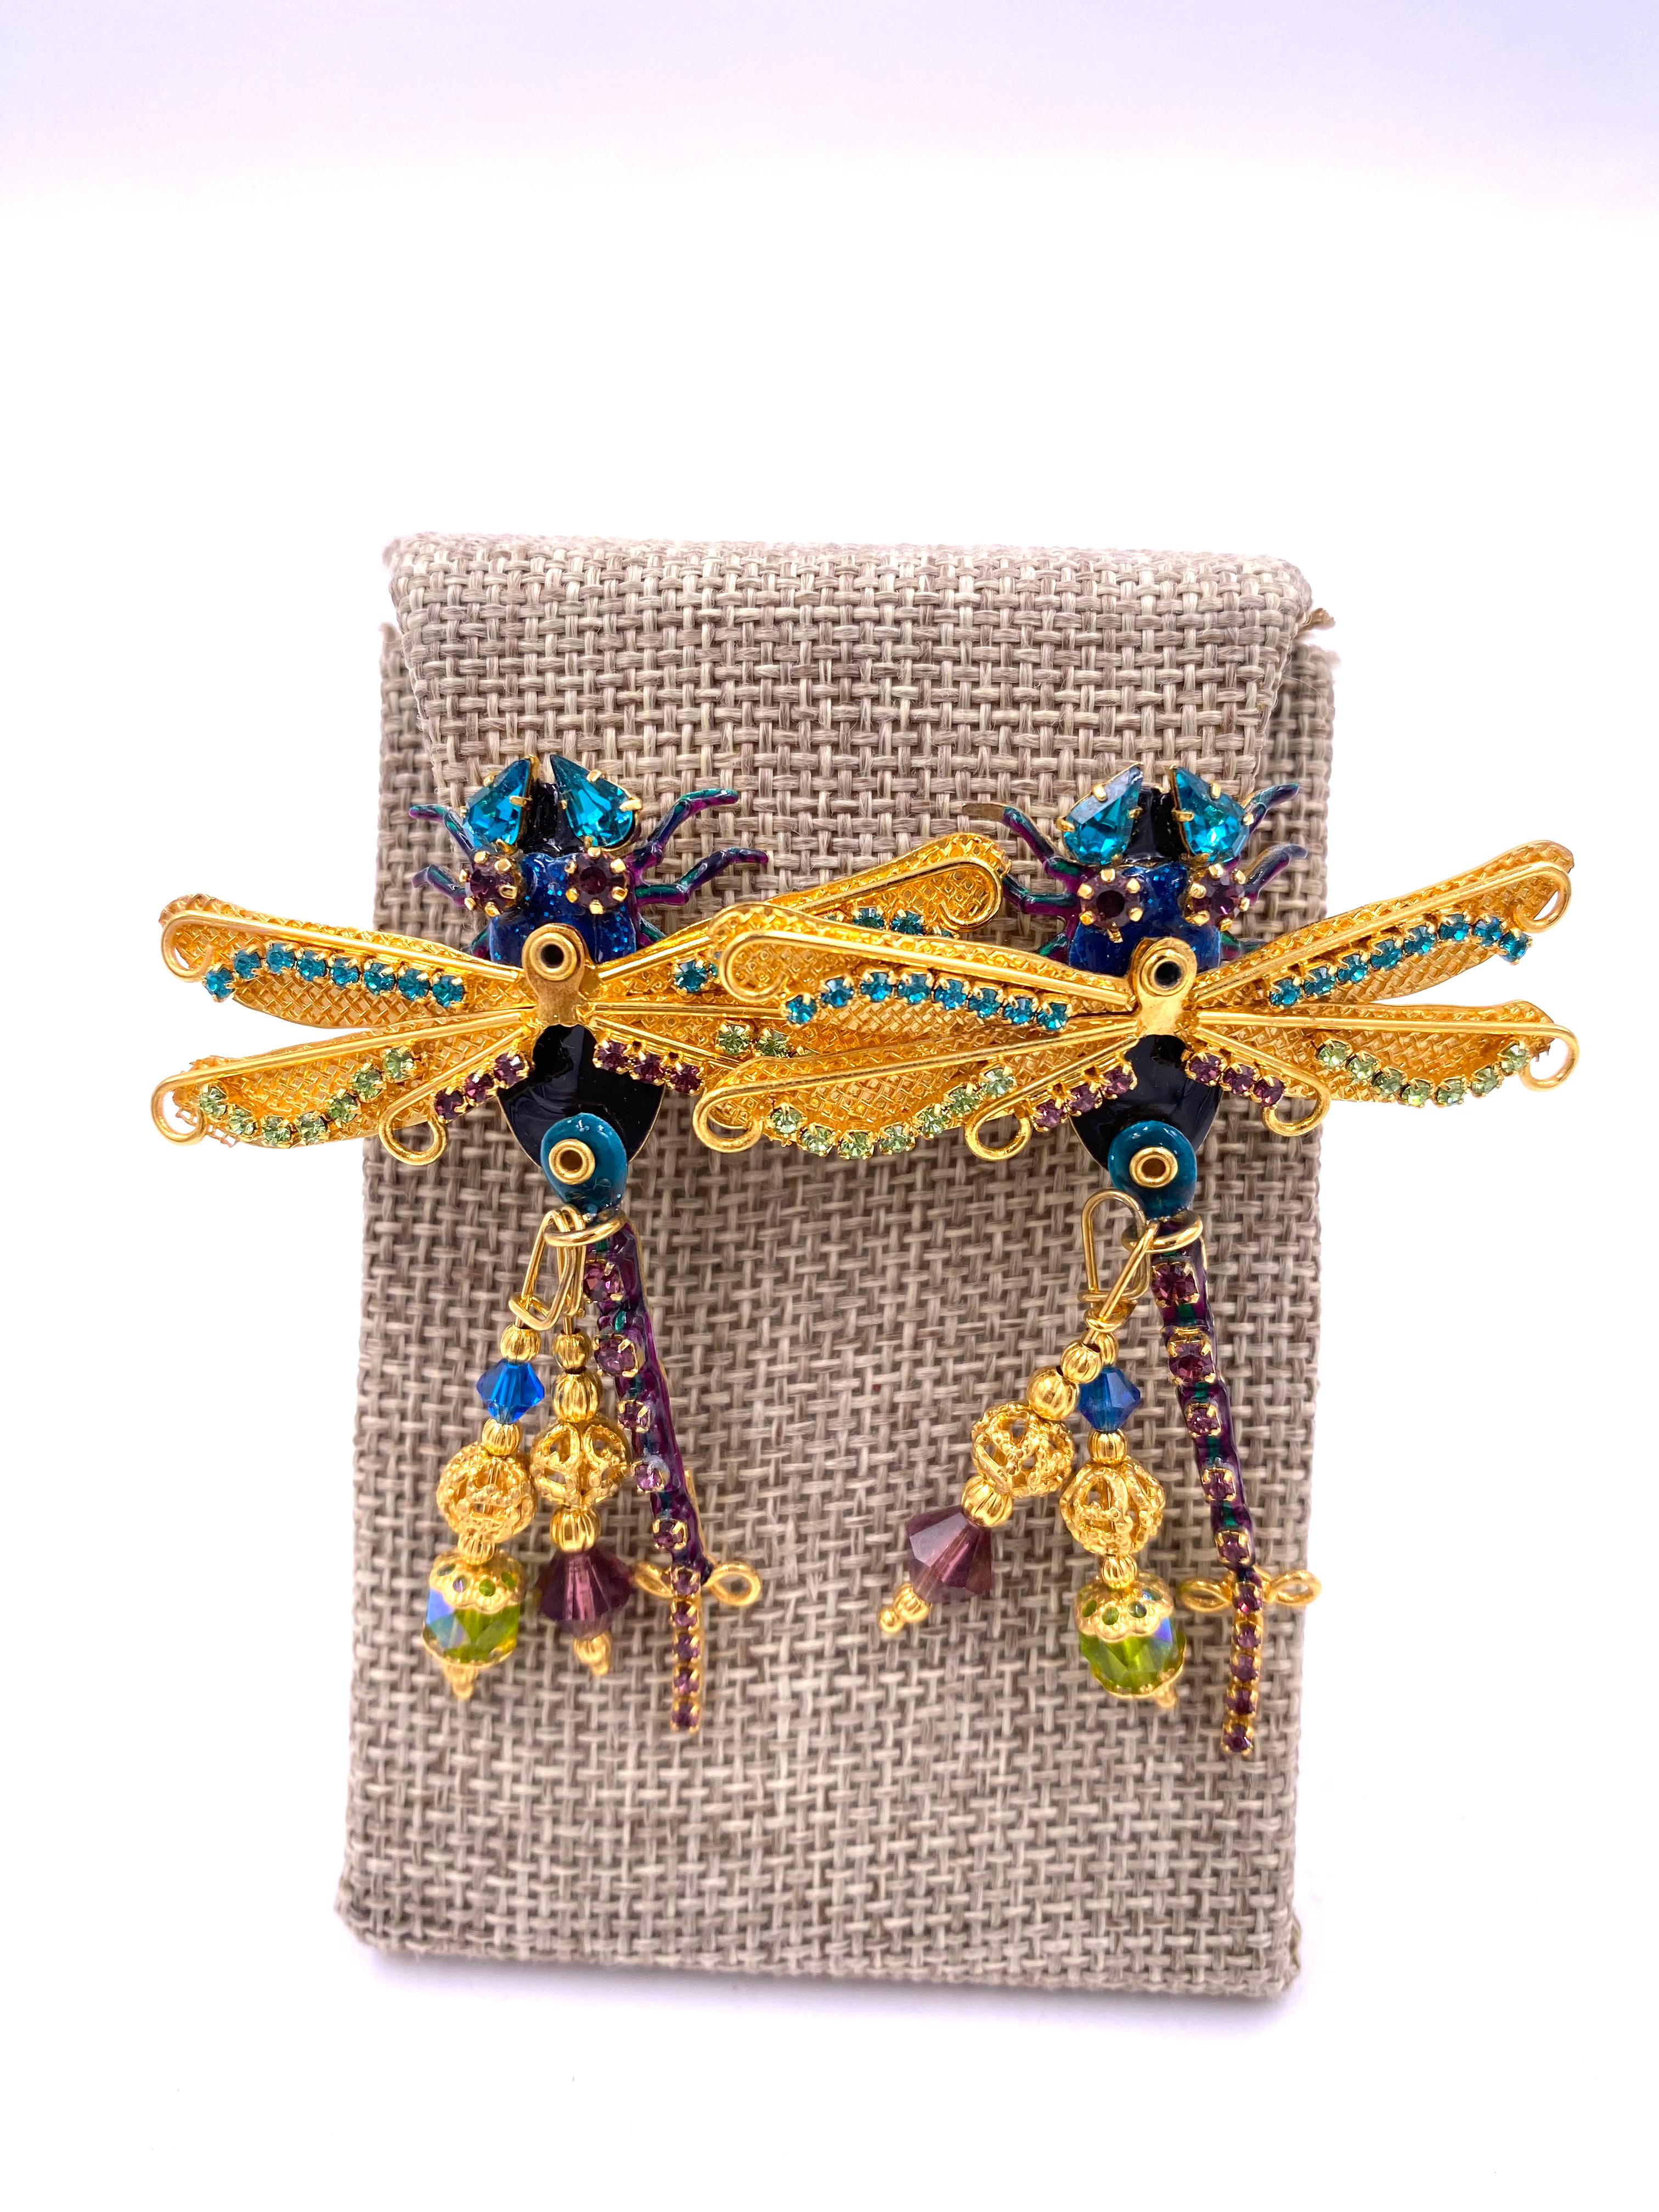 Indulge in the splendor of Lunch at the Ritz earrings, featuring striking damselflies with vibrant shades of purple, green, and blue. Adorned with dazzling rhinestones and intricate beading, these earrings are a luxurious addition to any collection.